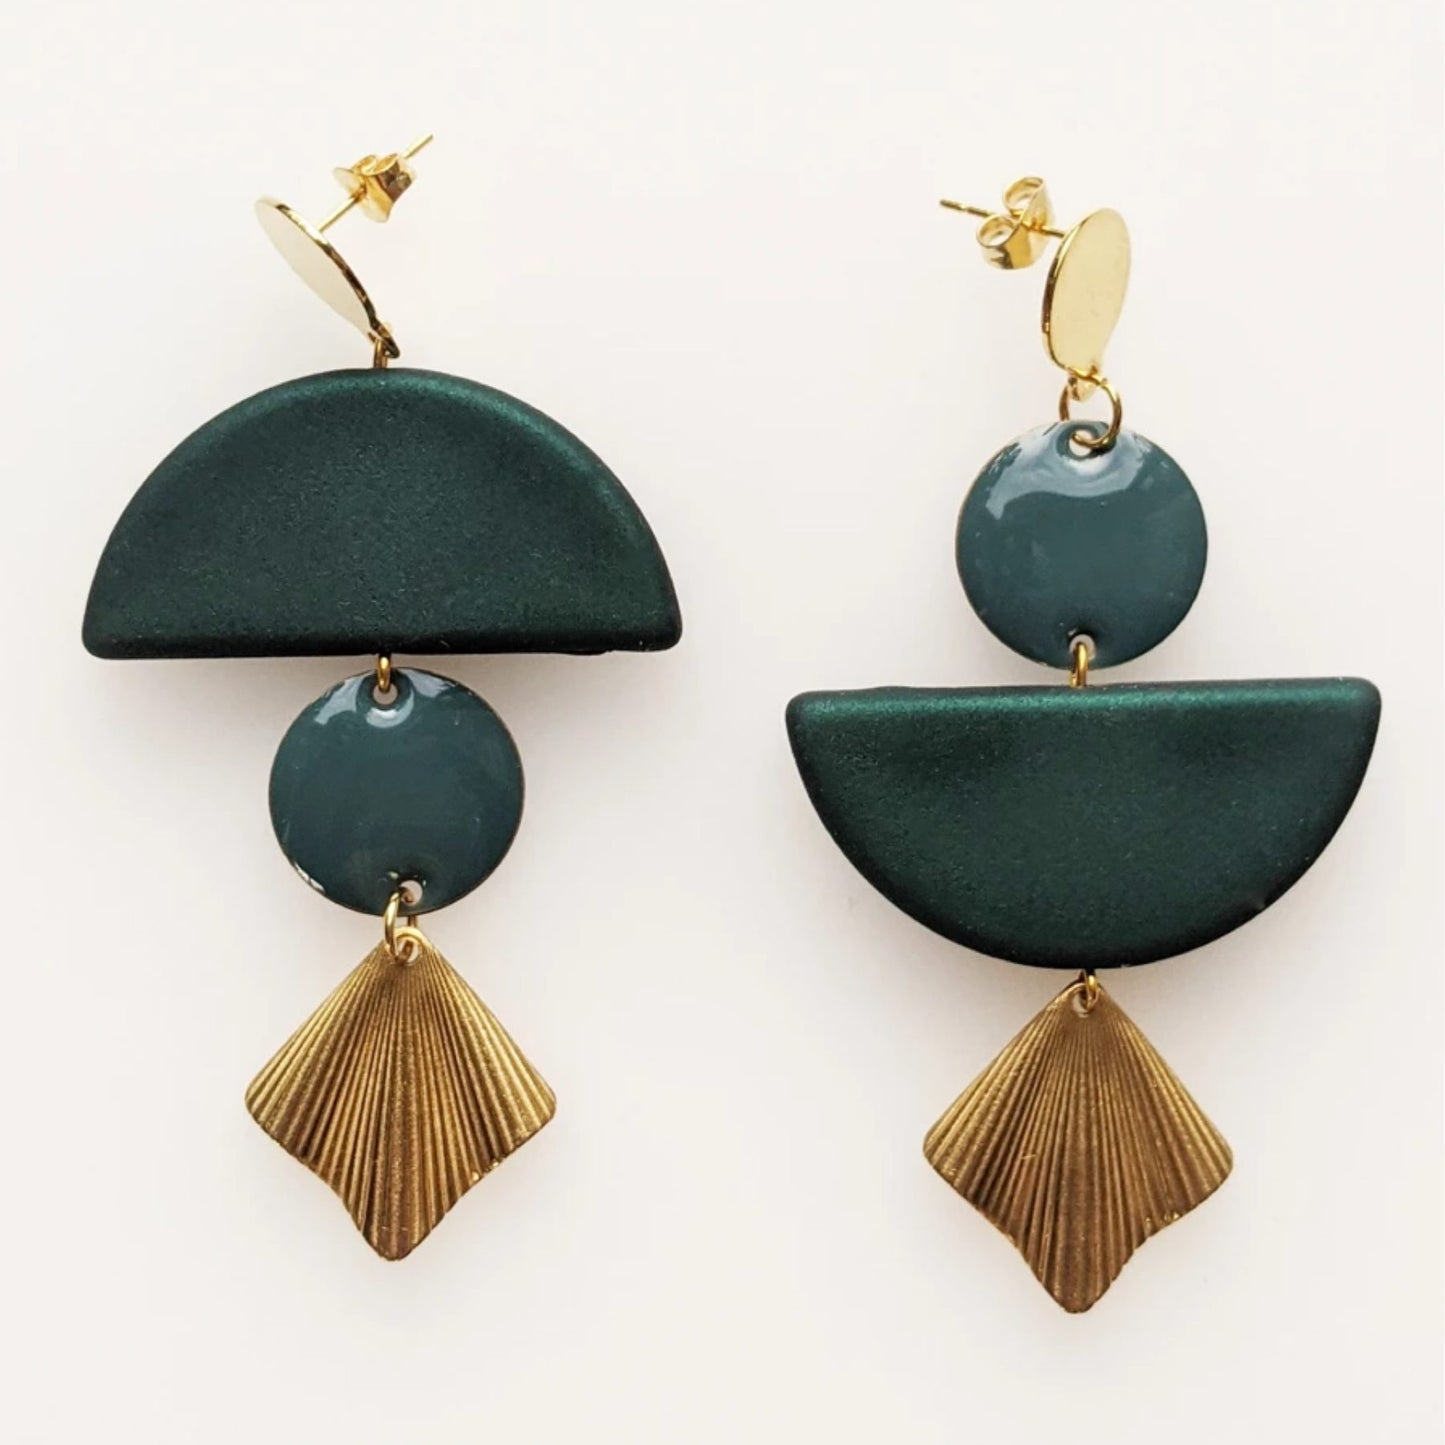 Middle Child Earrings Lovefool Green